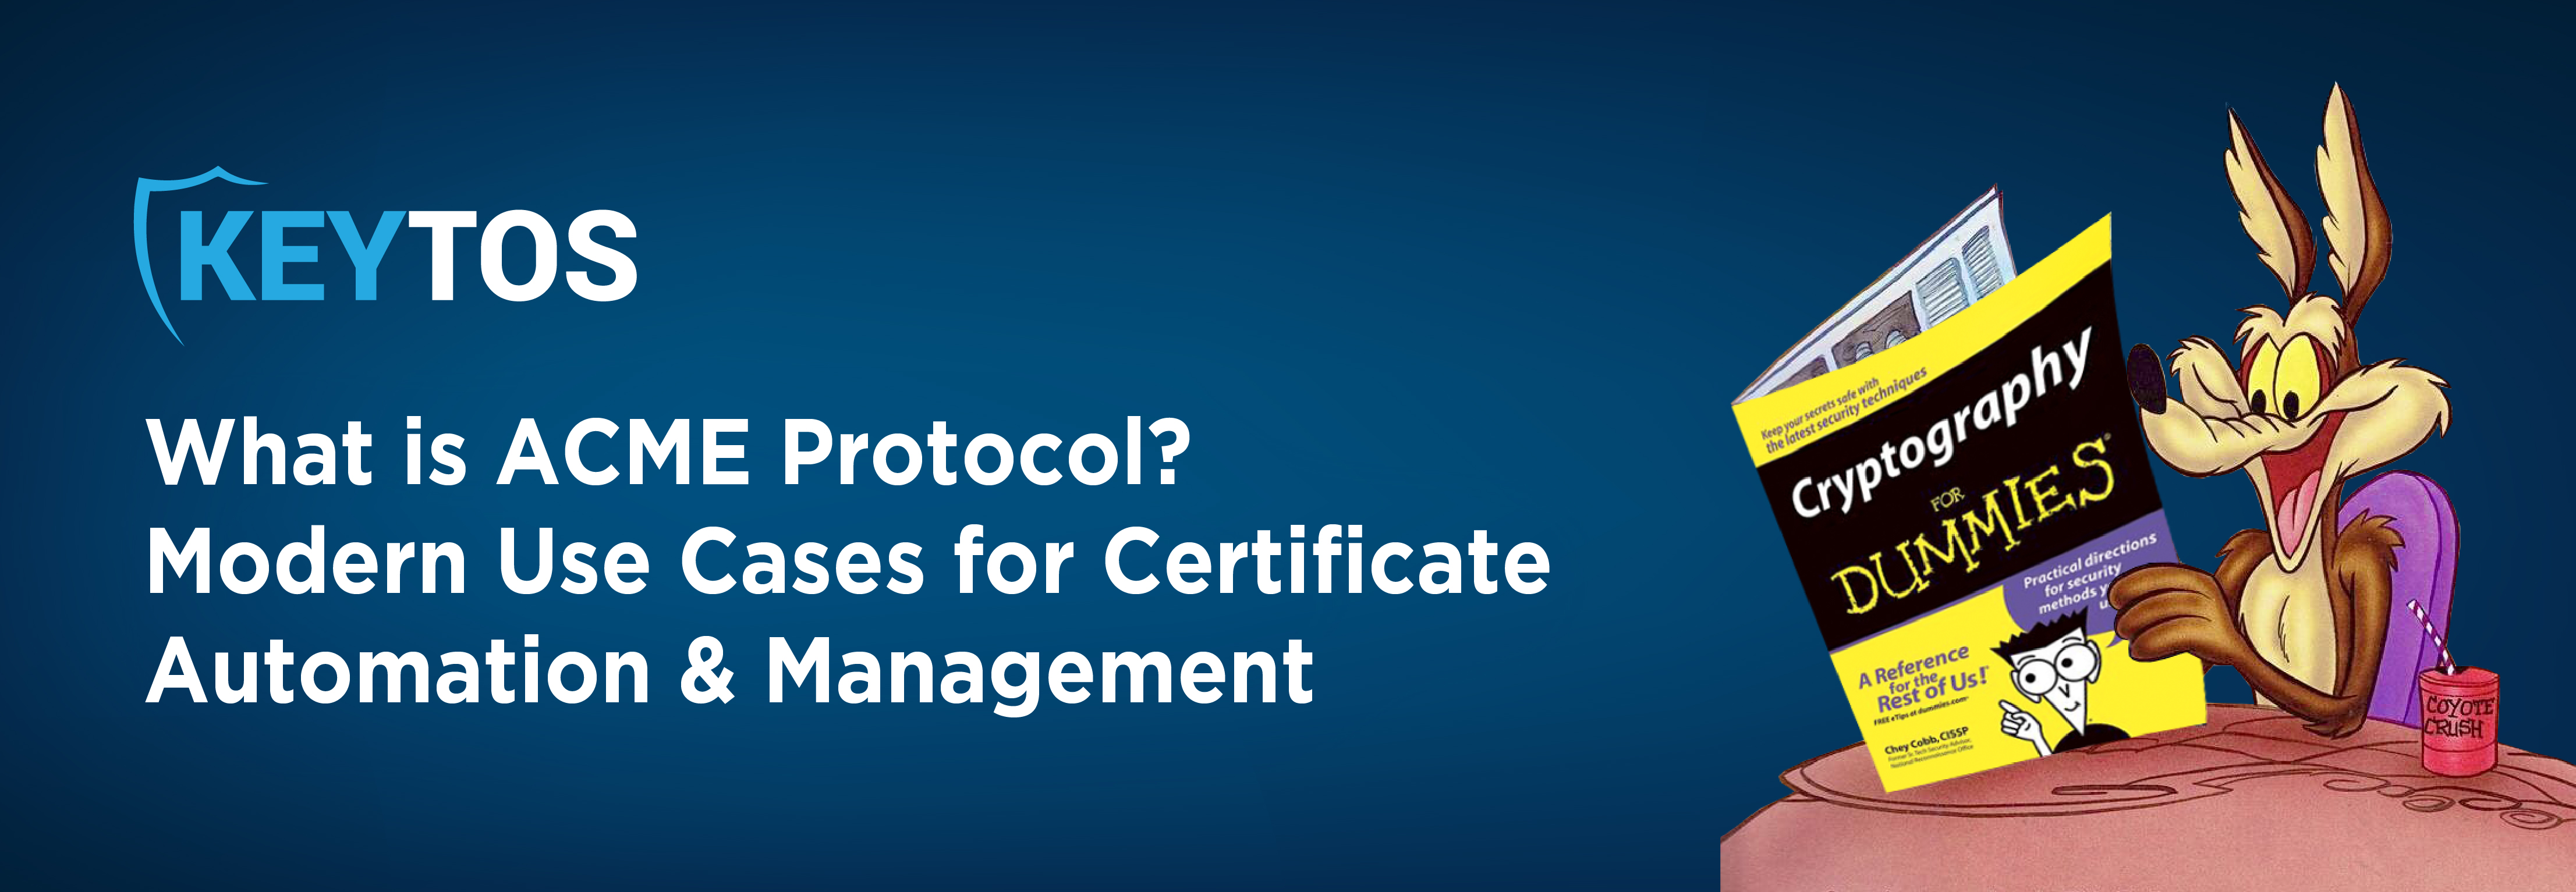 What is ACME Protocol? Modern Use Cases for Certificate Automation & Management